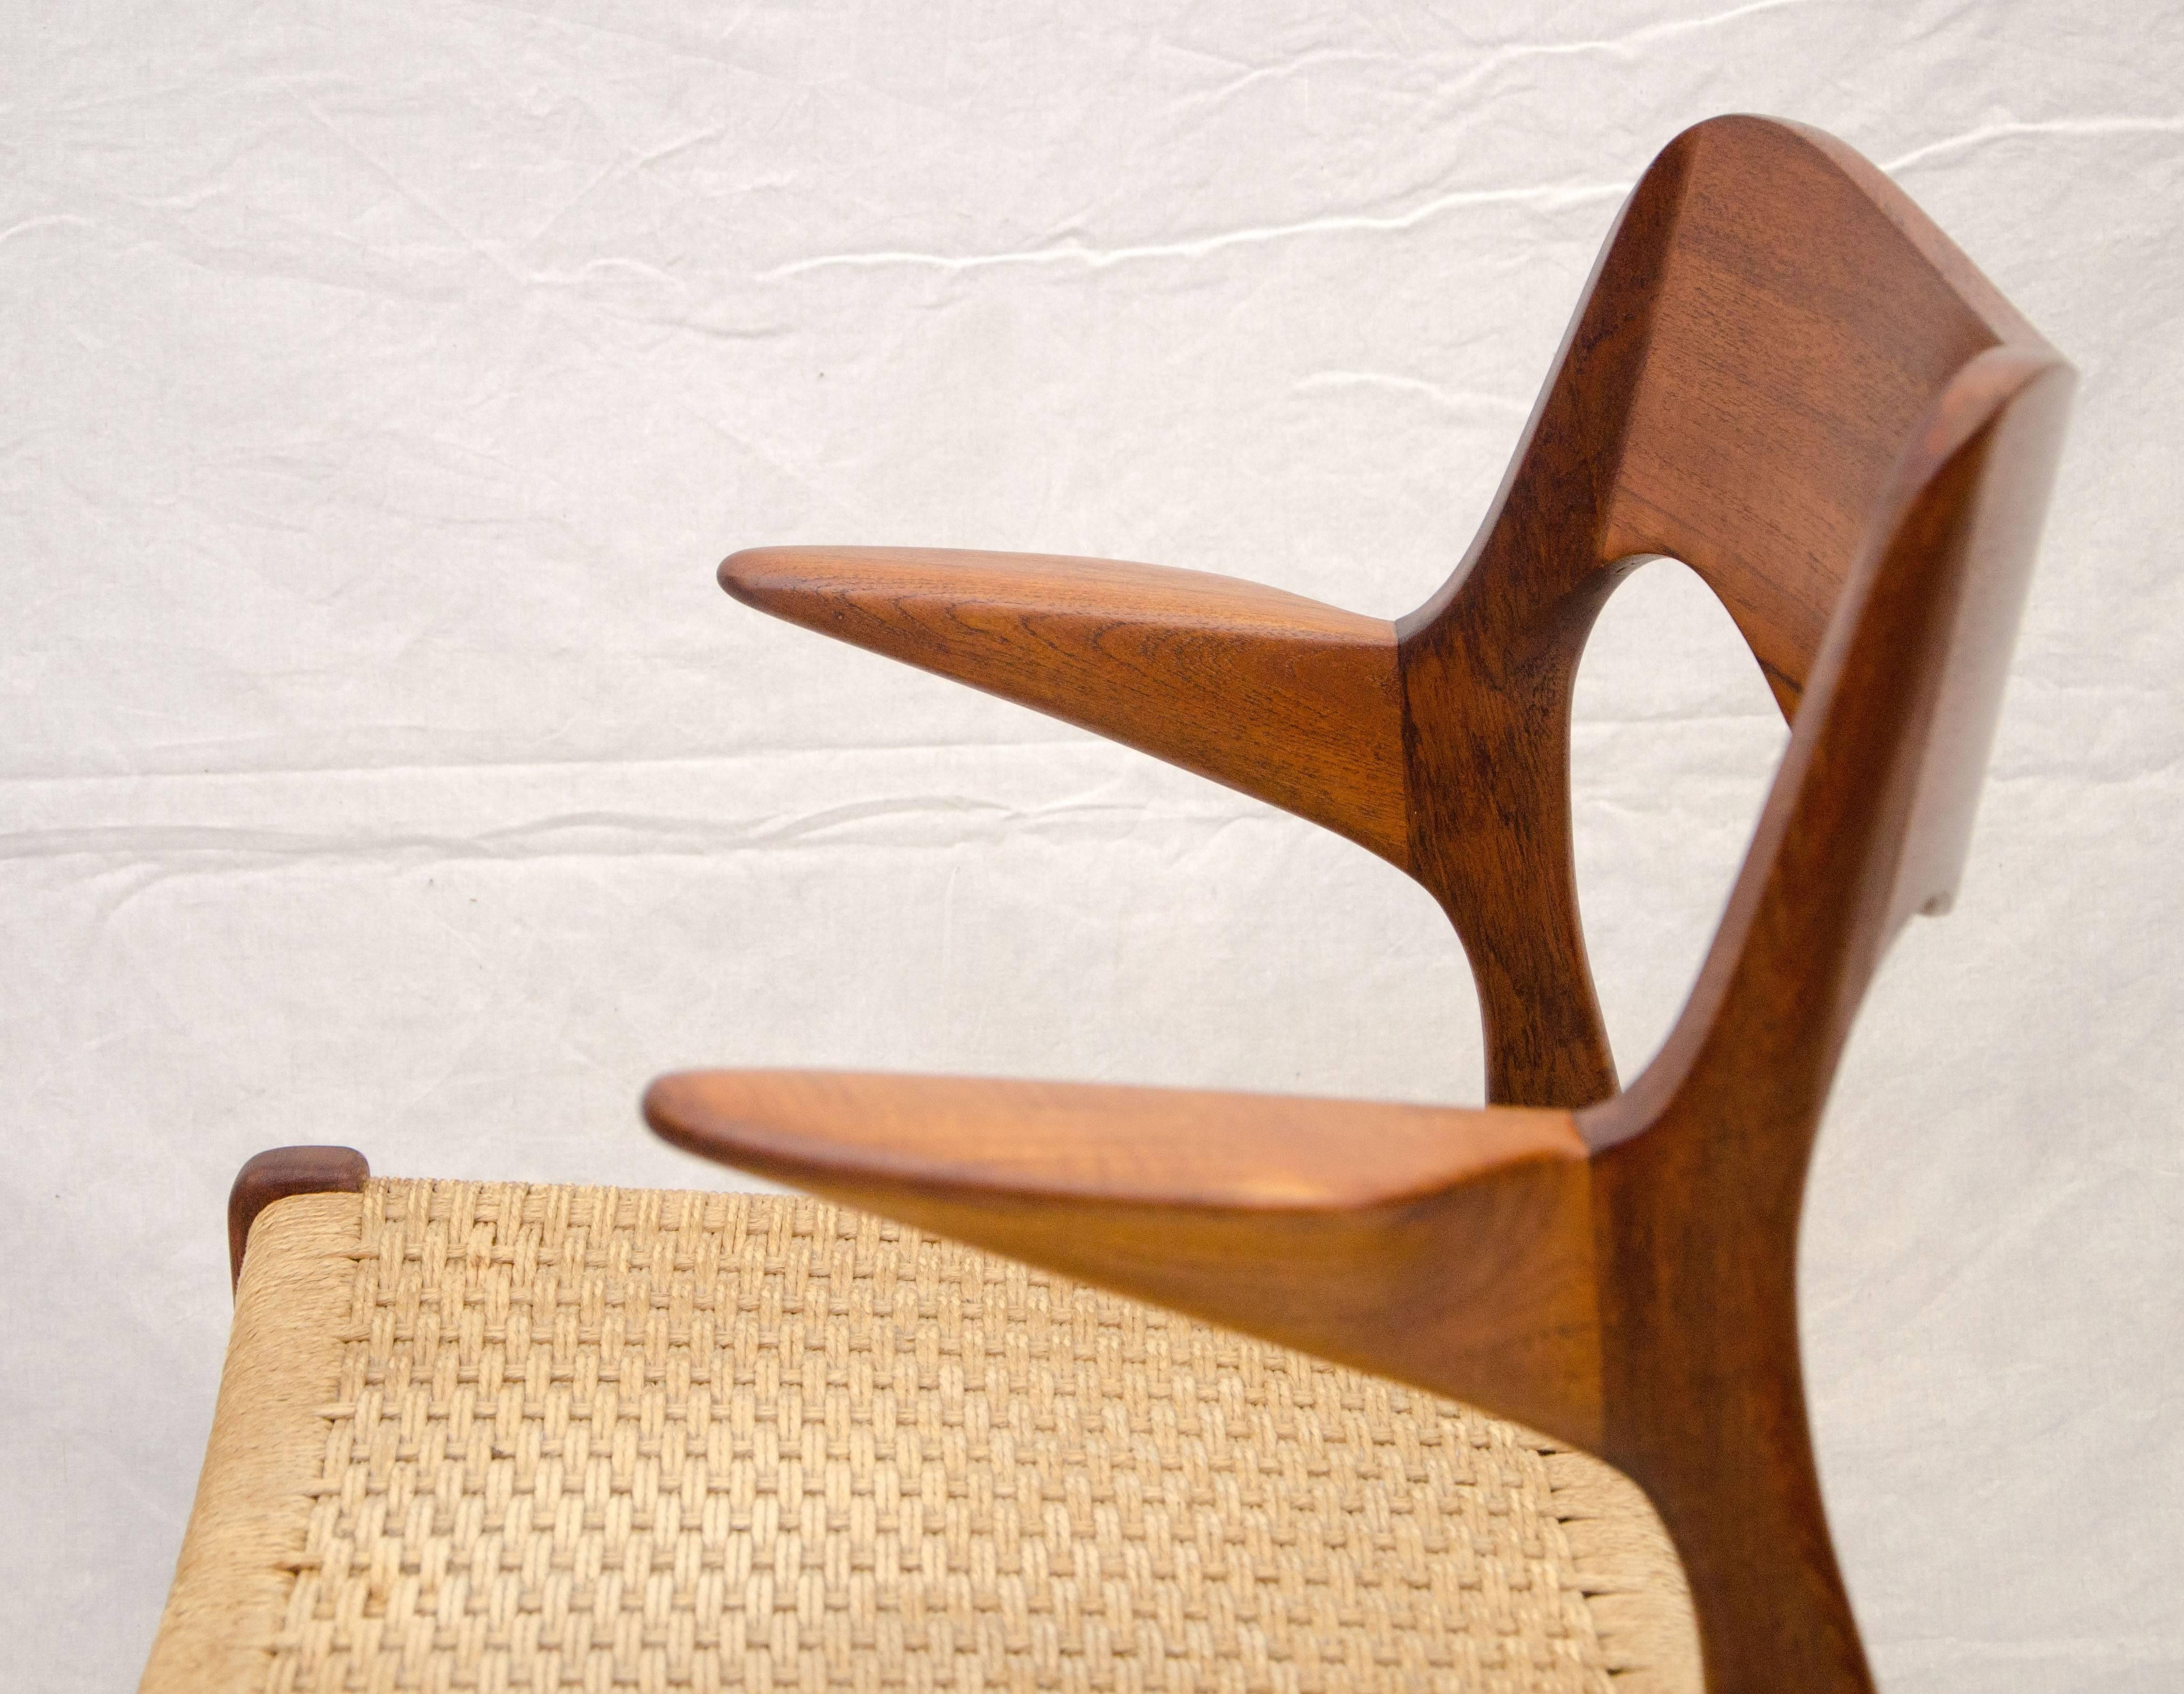 Set of Four Danish Teak Dining Chairs, Moller #71 and #55 In Good Condition For Sale In Crockett, CA